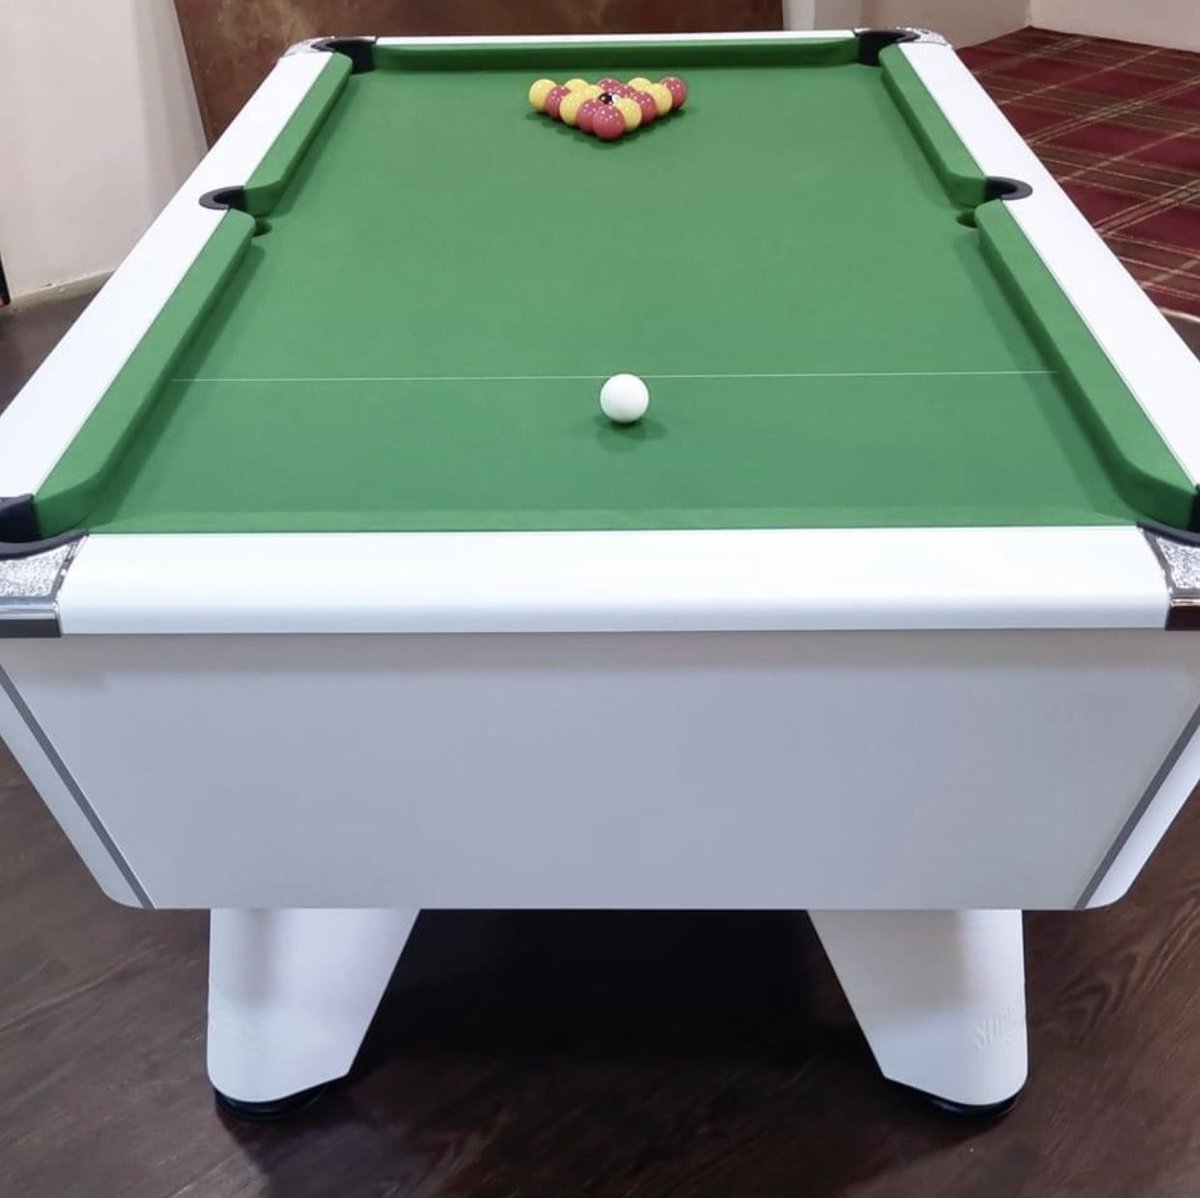 We are looking for new players to join our Pool team this season. If you are interested, do come down to The Rectory Field on Bank Holiday Monday 1st May any time from 12-5pm. We’d love to meet you #Greenwich #SE10 #CharltonSE7 #Blackheath #SE3 #Eltham #SE9